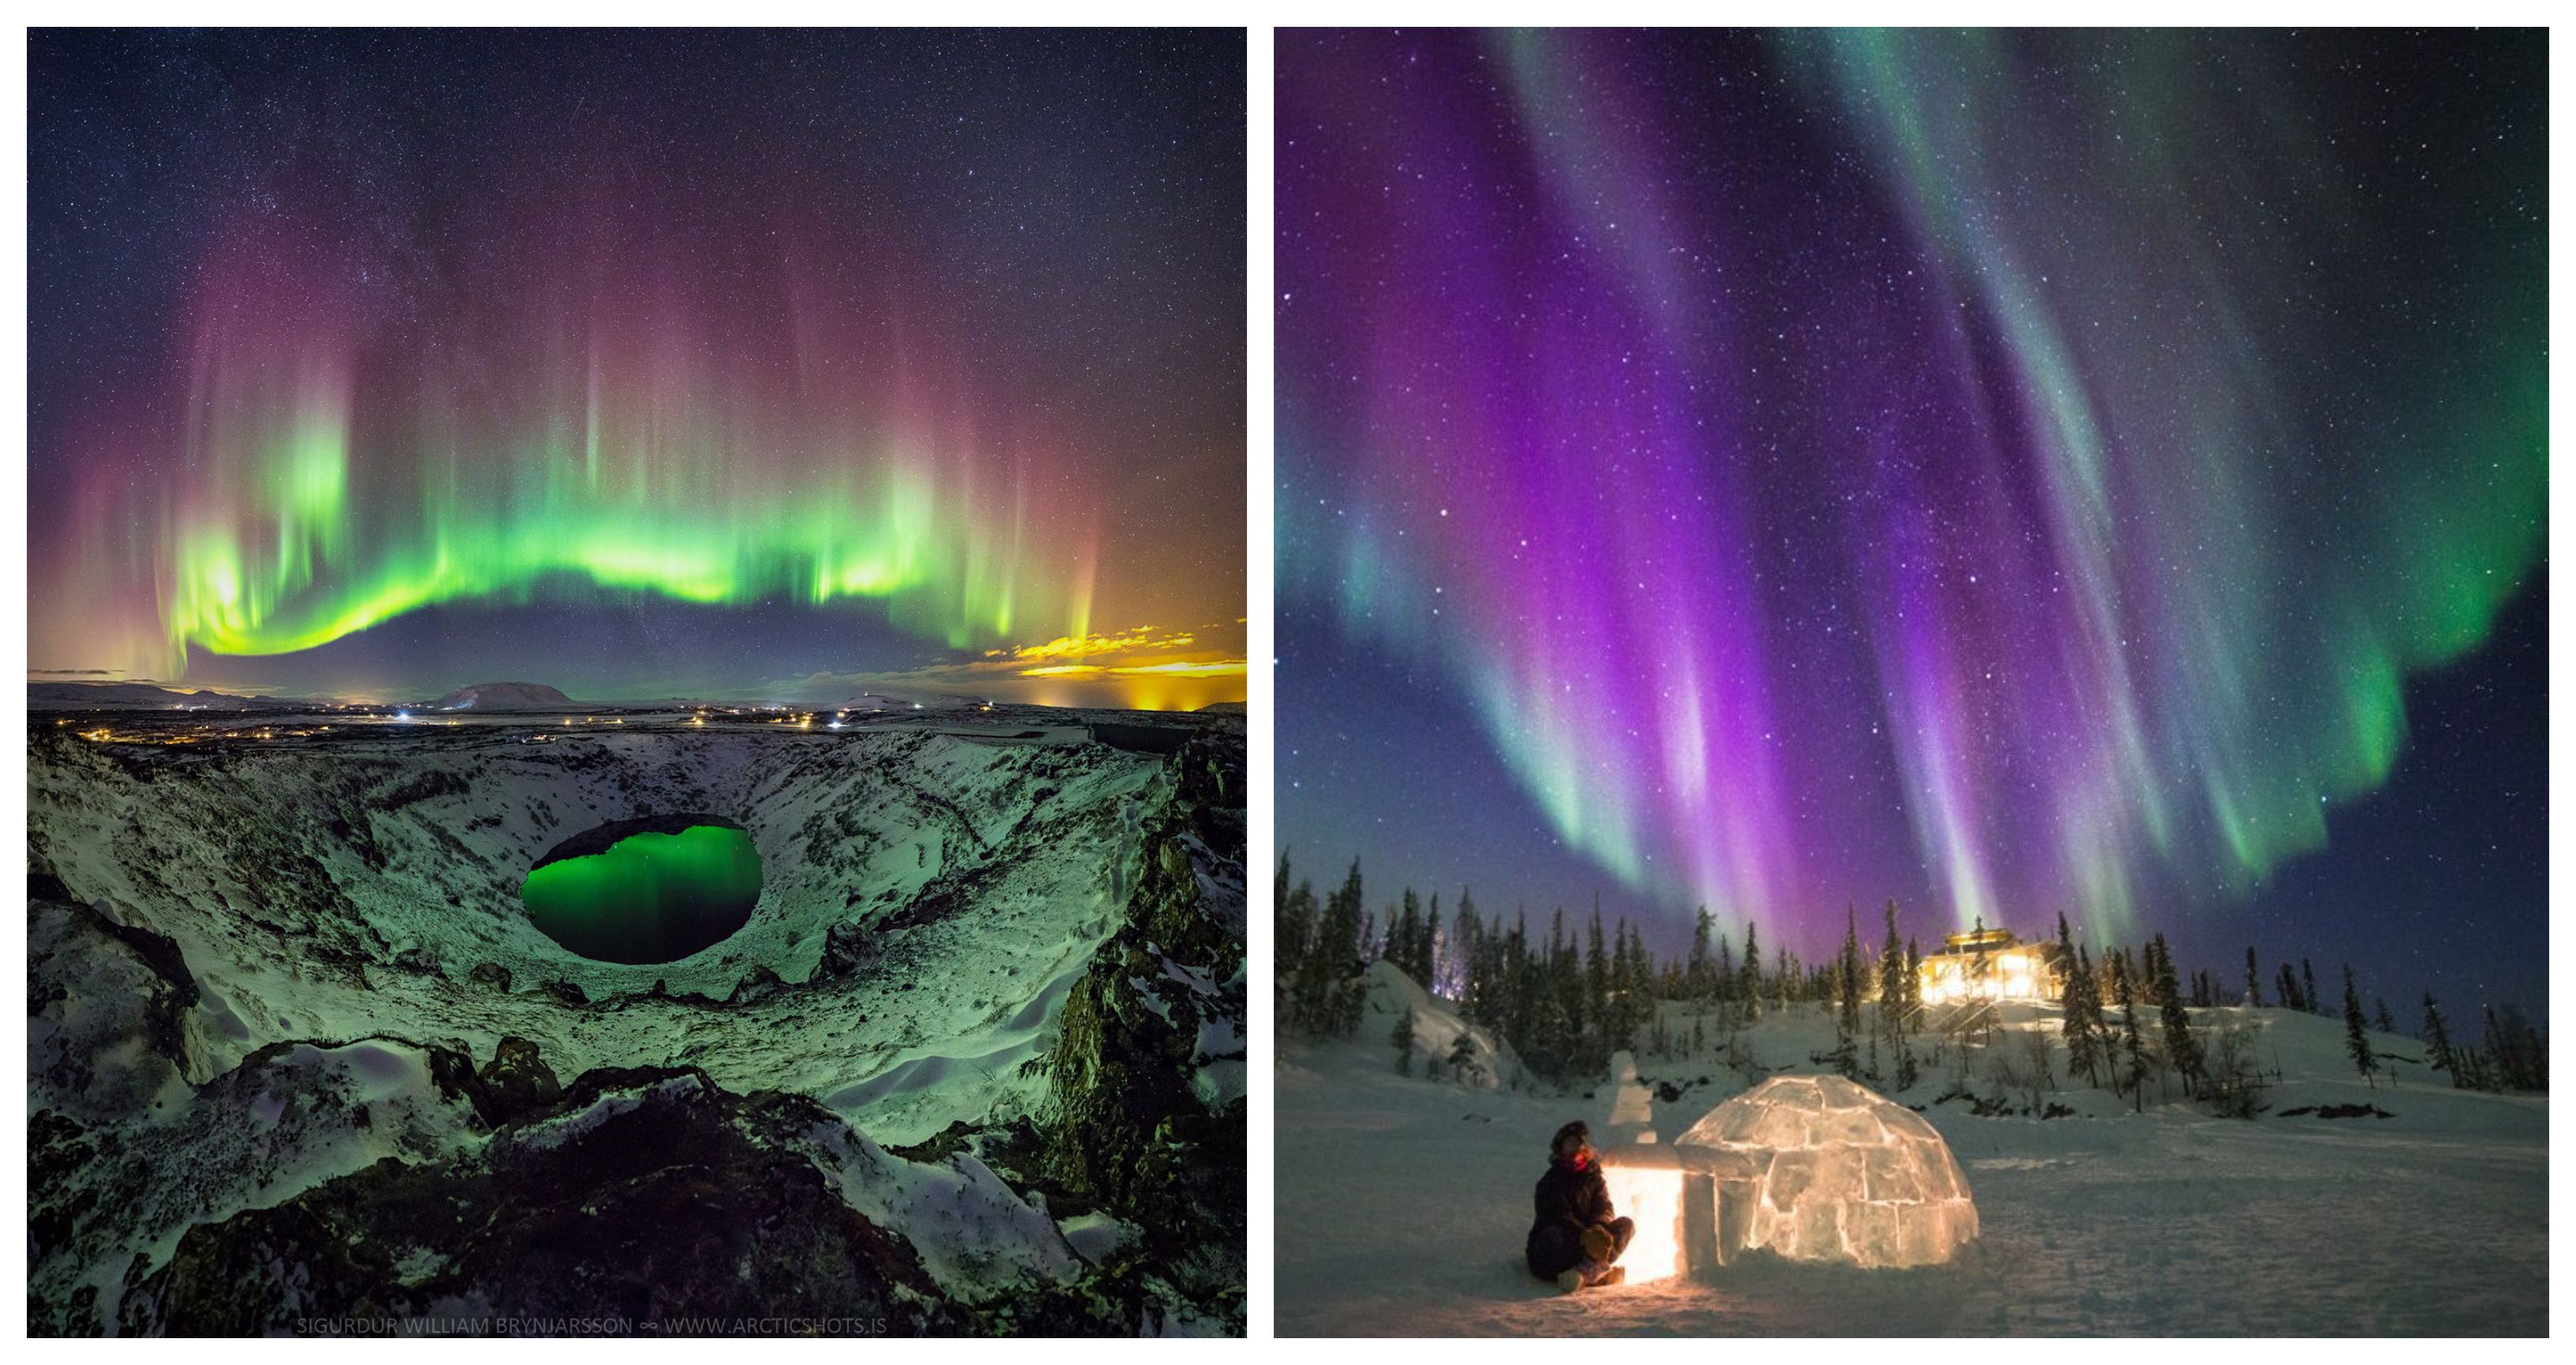 20 Of The Best Places To Get A Better View Of The Aurora Borealis